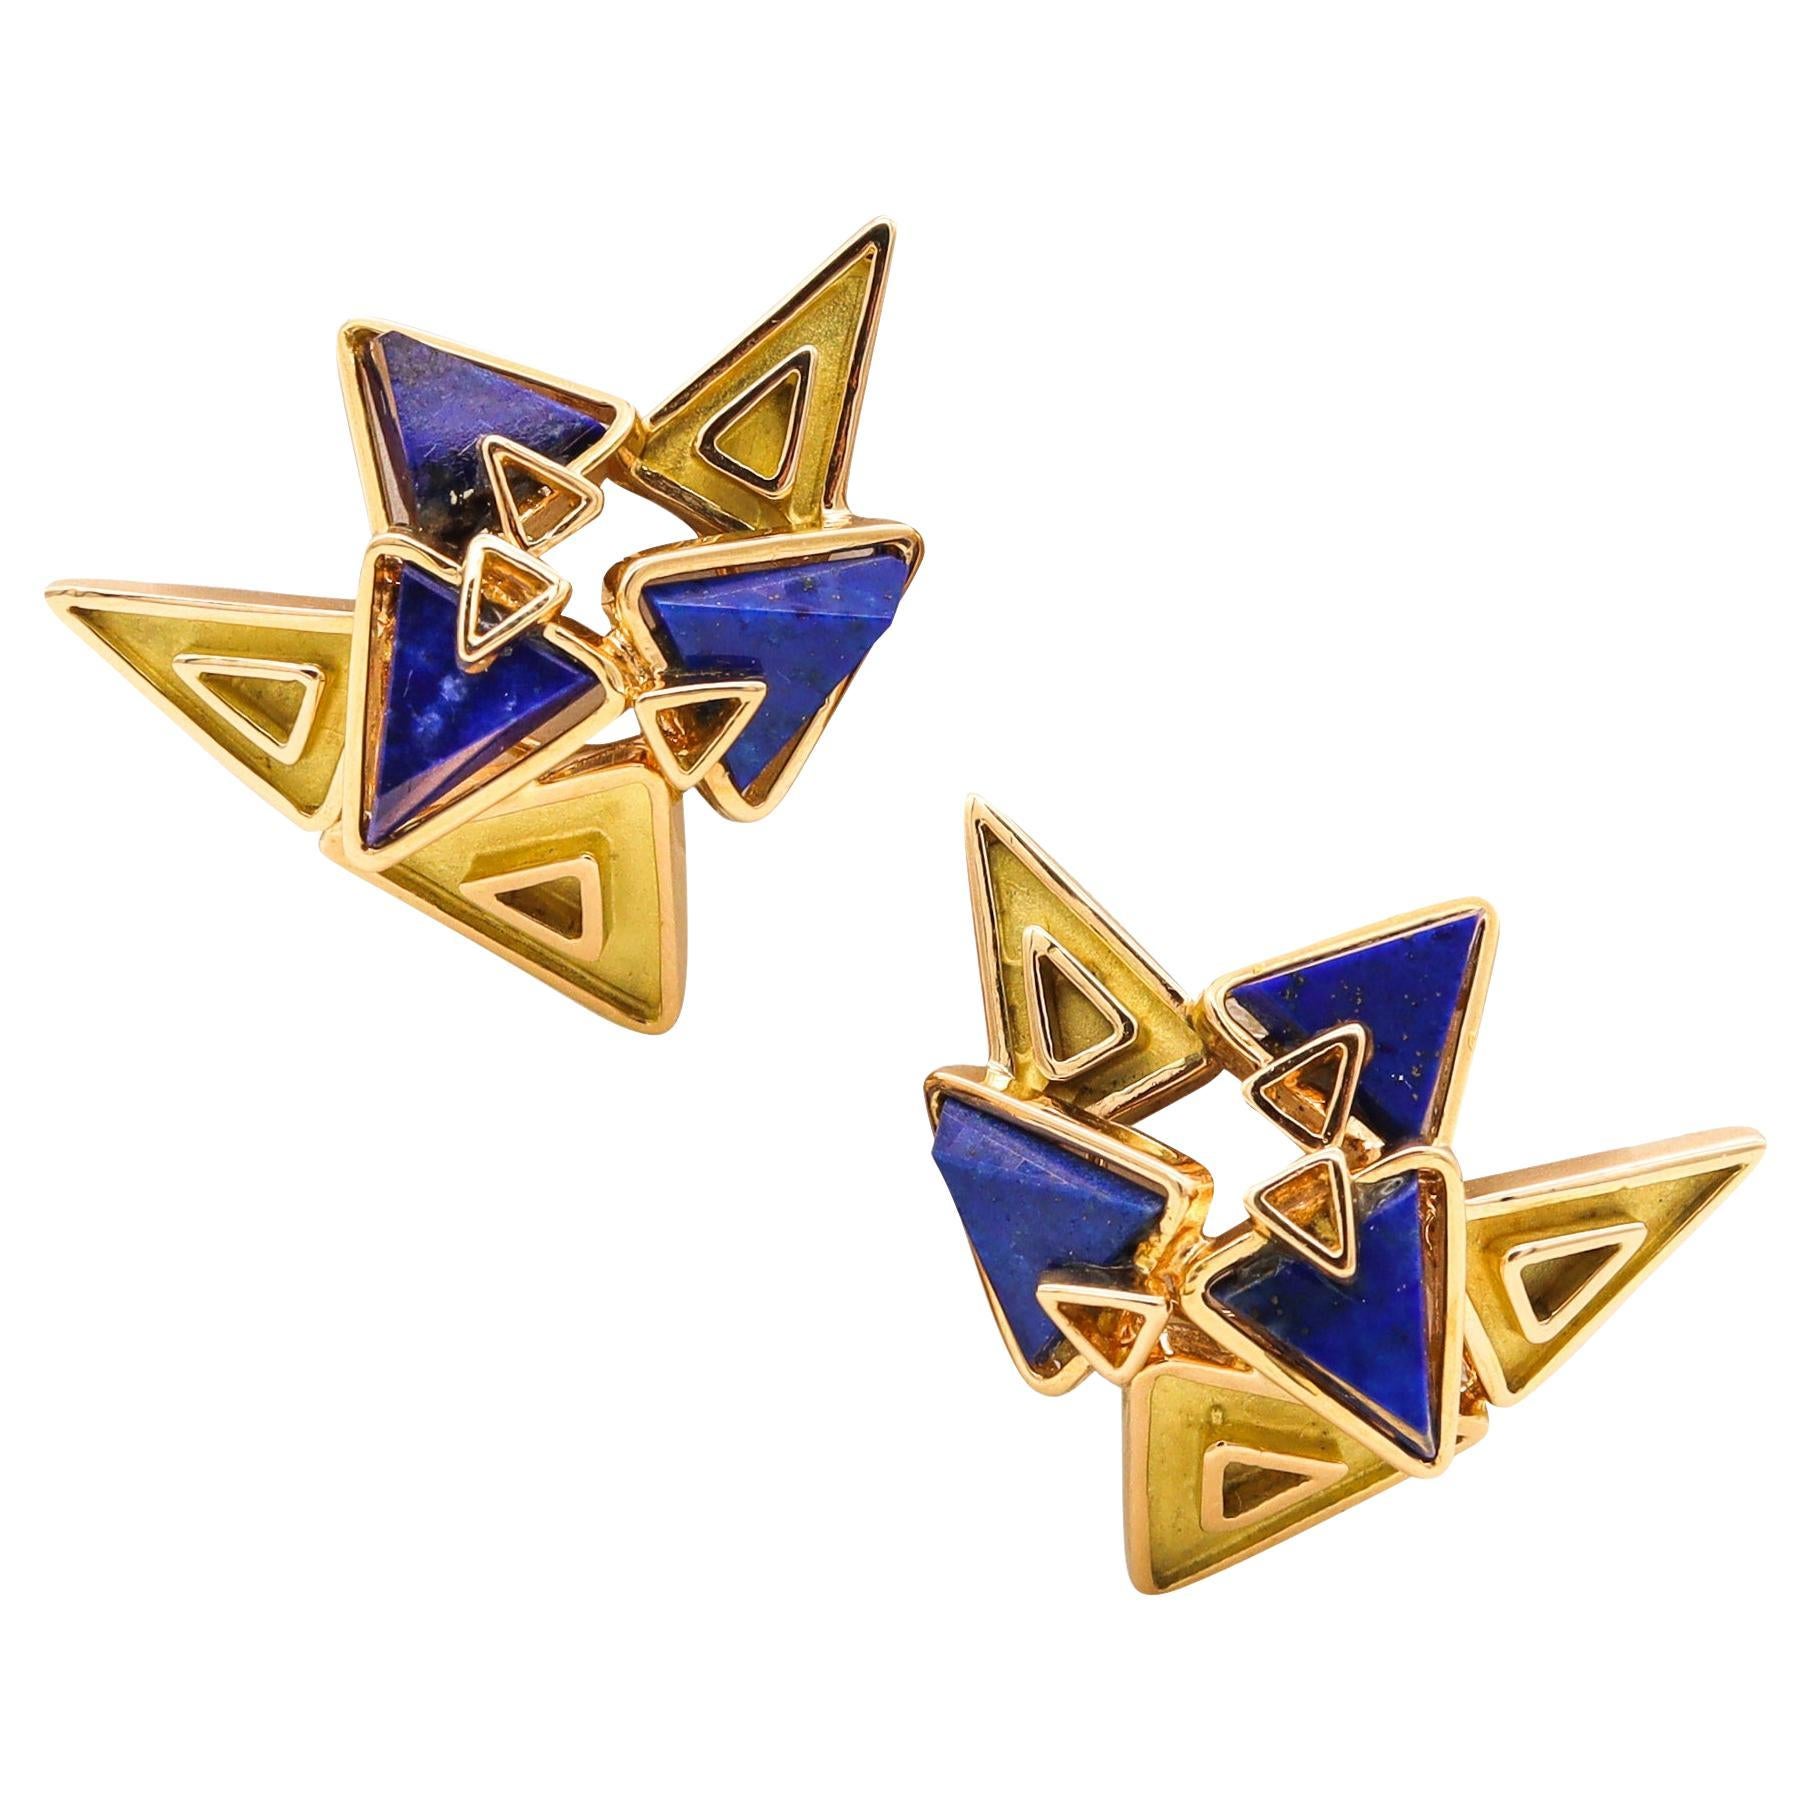 Chaumet Paris 1970 Rare Geometric Clip-on Earrings 18Kt Gold With Carved Lapis For Sale